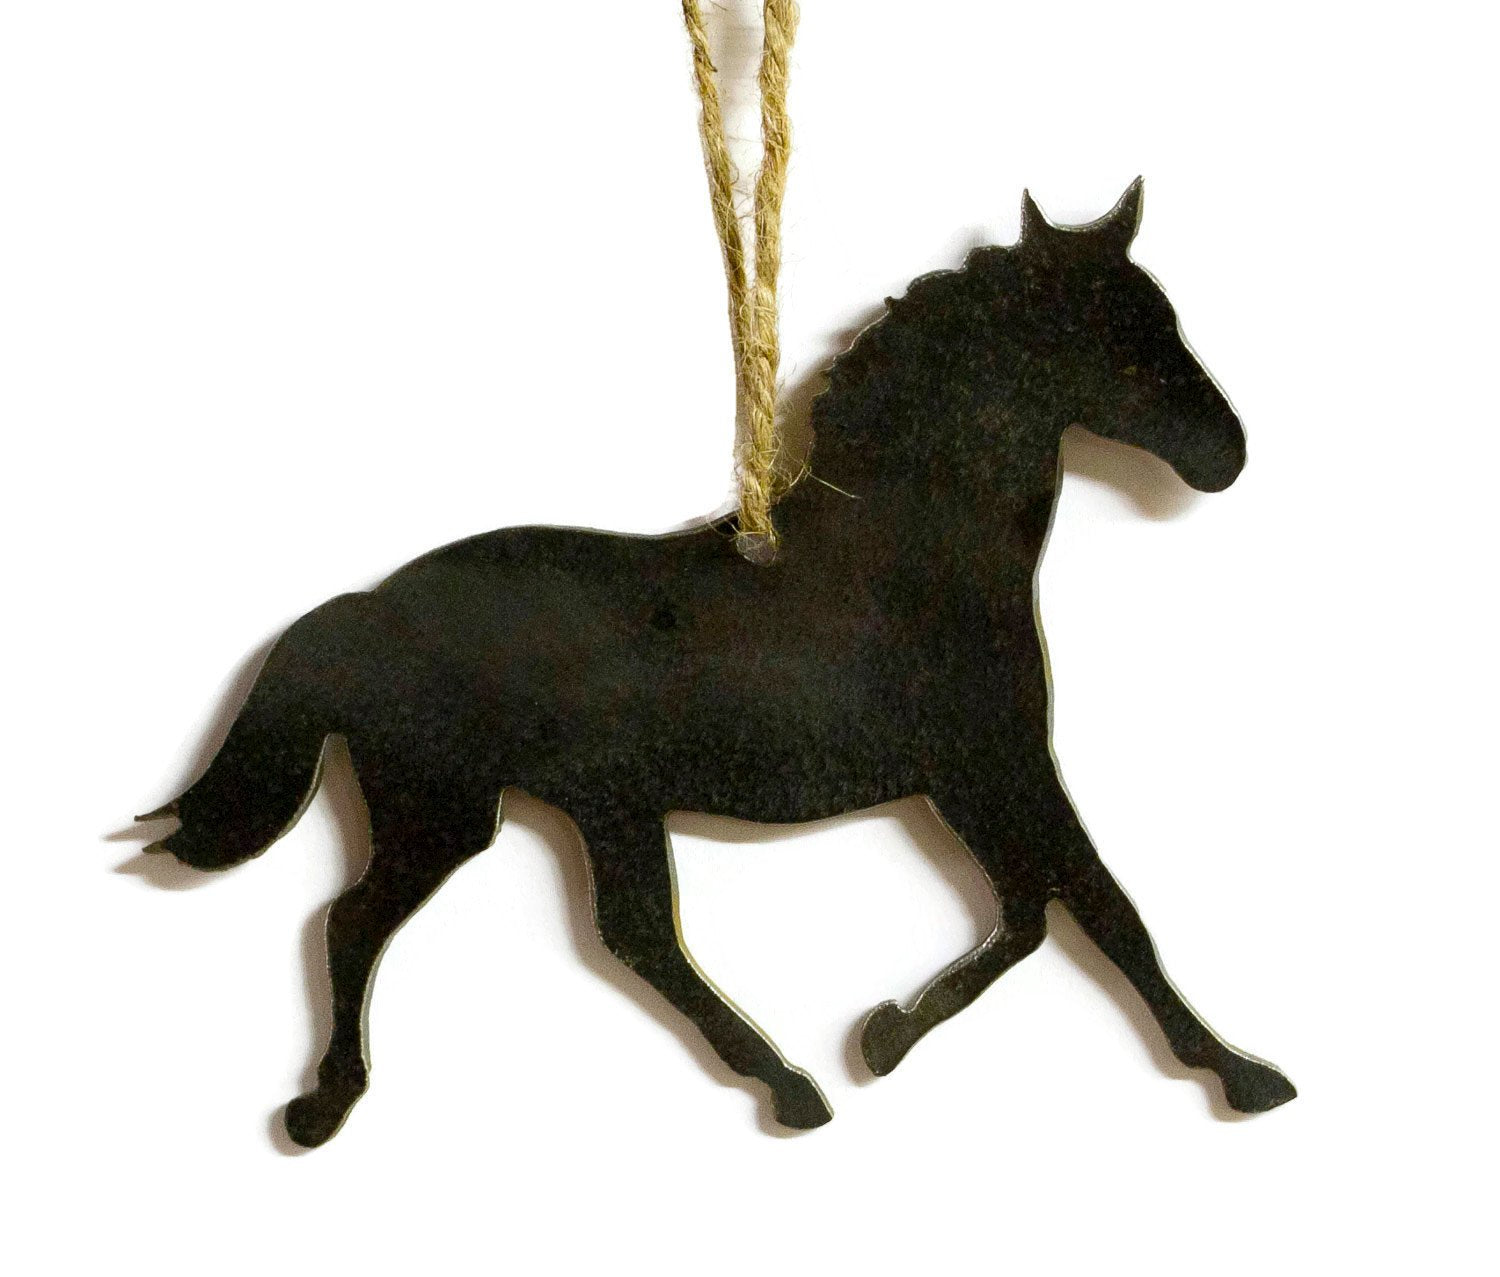 Horse Equestrian Metal Christmas Ornament Tree Stocking Stuffer Party Favor Holiday Decoration Raw Steel Gift Recycled Nature Home Decor